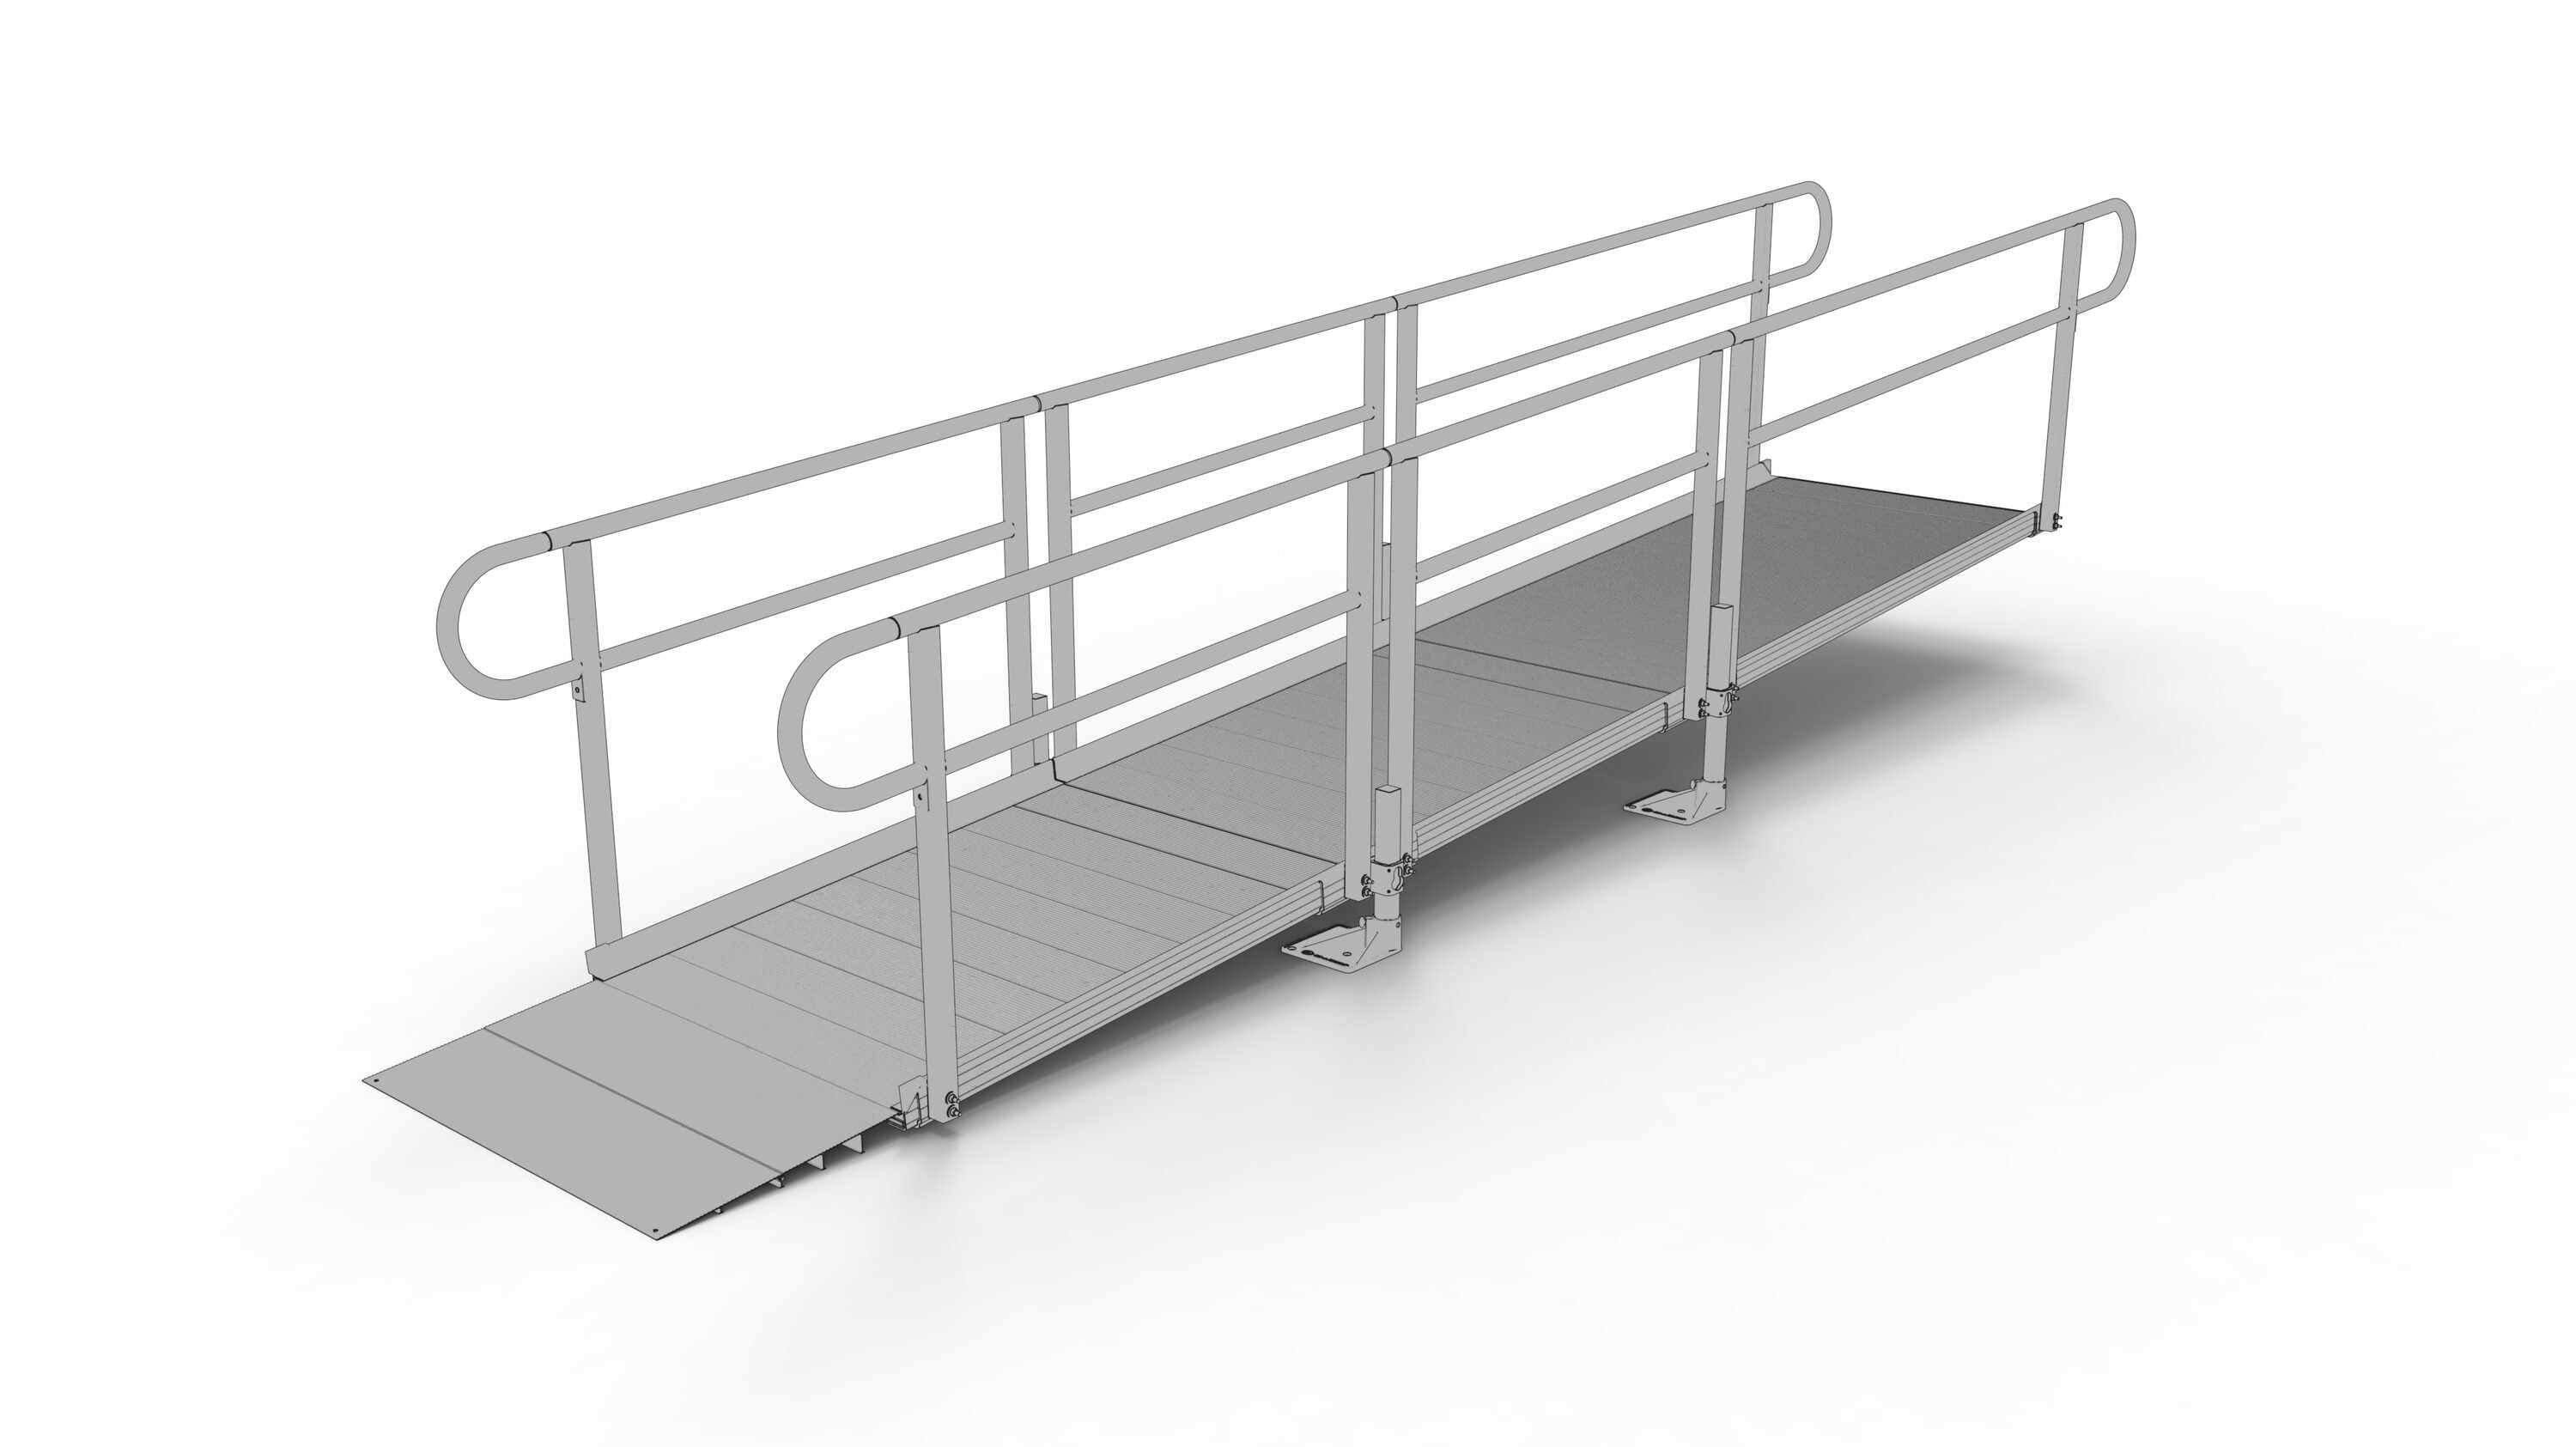 EZ-ACCESS Wheelchair Ramps at Lowes.com